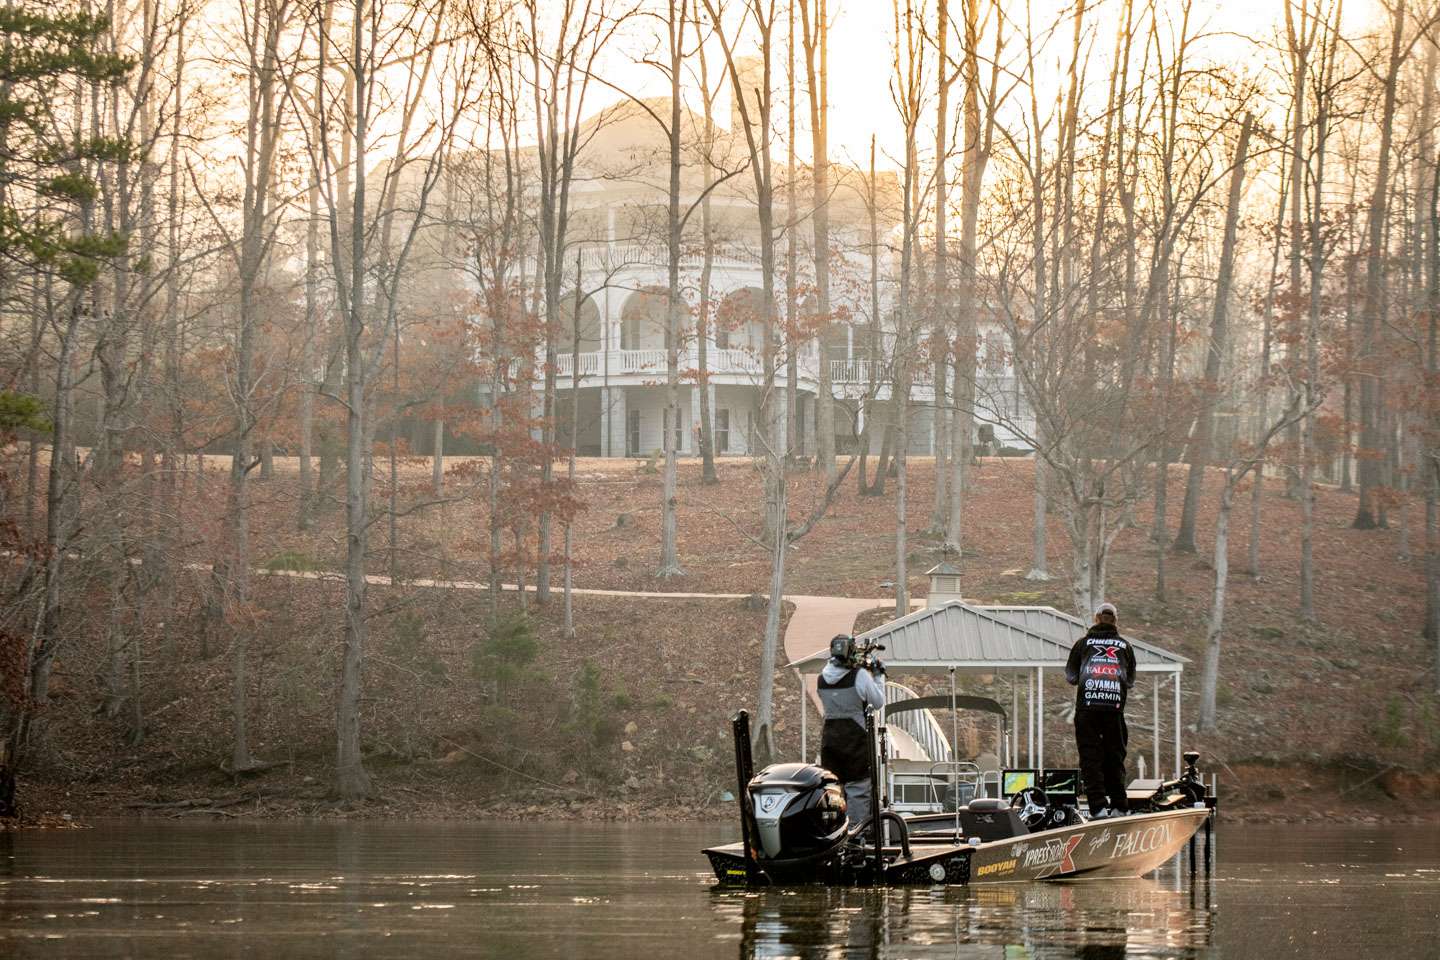 Christie is using a finesse set up and a shad-style bait. He spent a large portion of his morning scoping out this cove.
